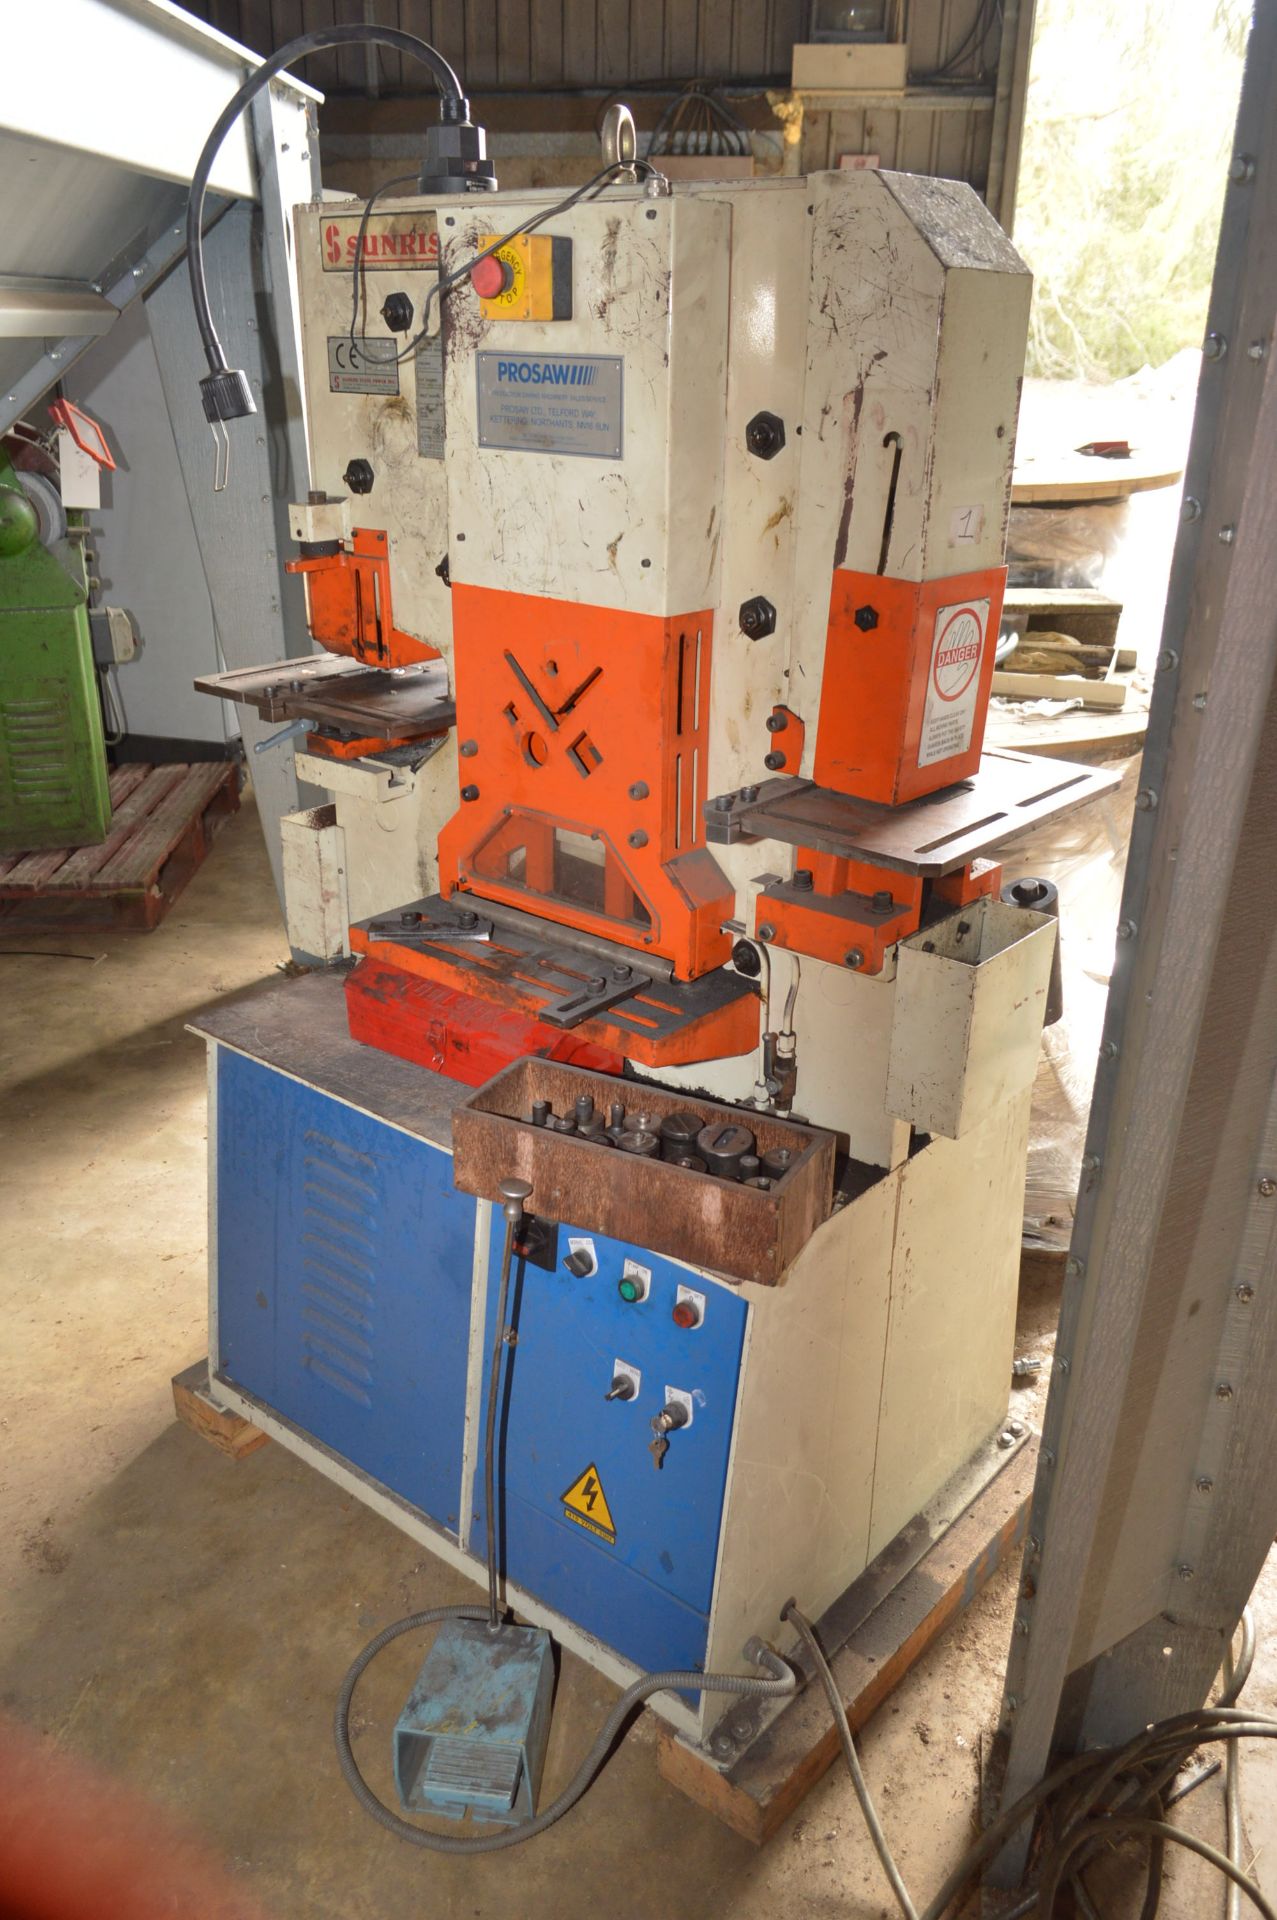 Sunrise IW-60K HYDRAULIC METAL WORKER, serial no. 348198, year of manufacture 2004, with punch - Bild 2 aus 8